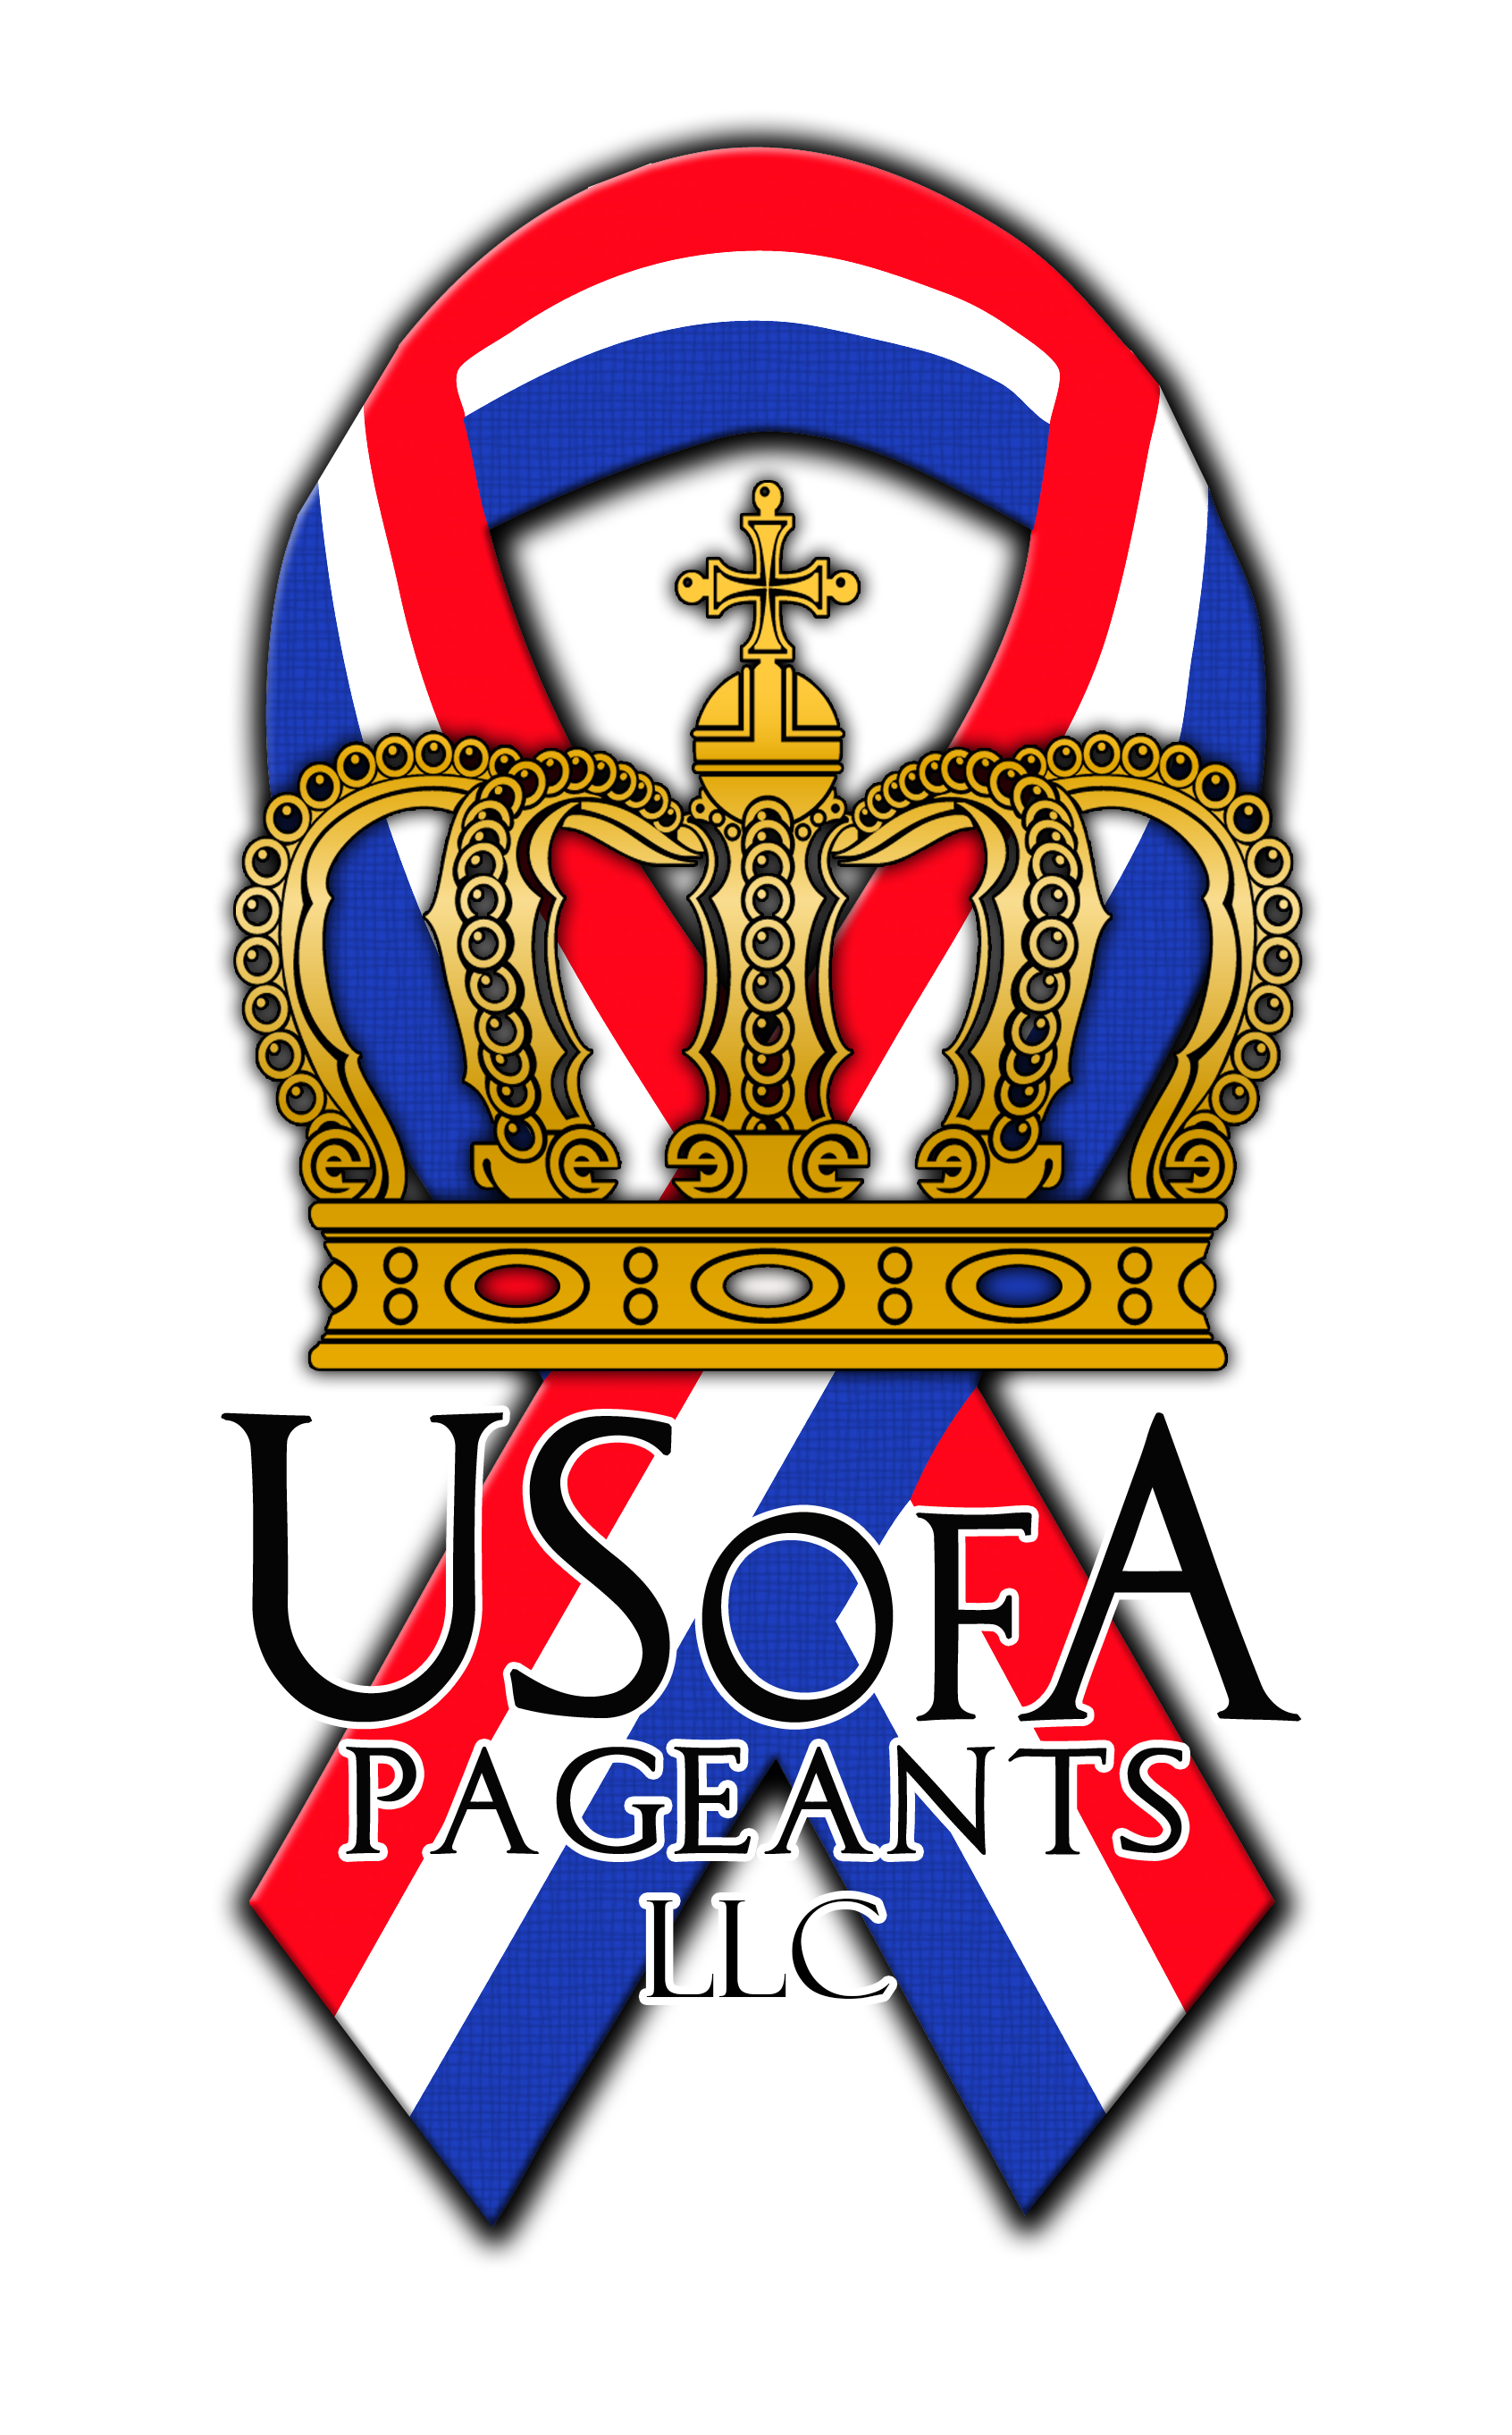 Miss Gay USofA 2017 Schedule of Events